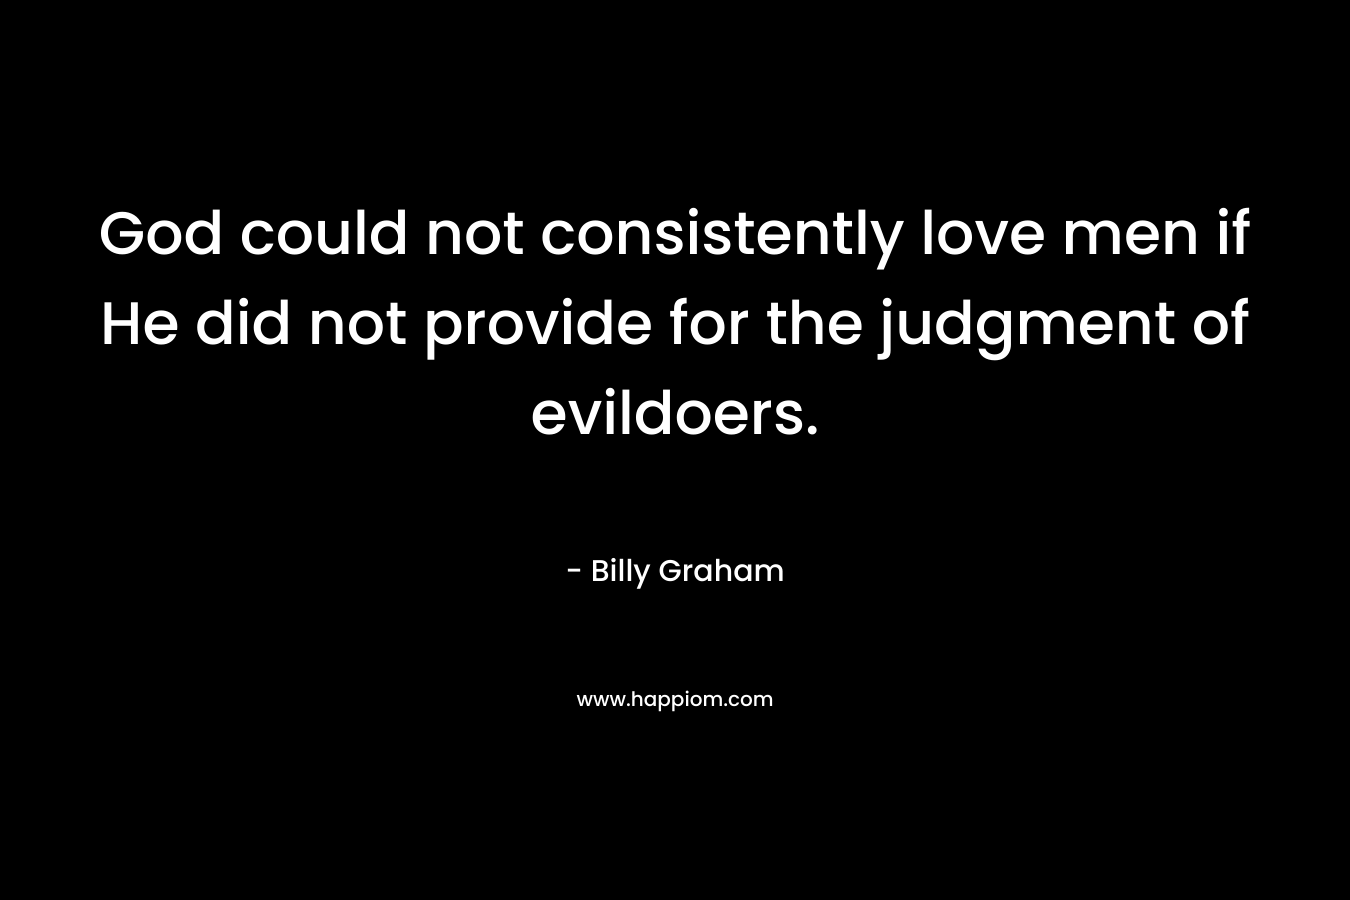 God could not consistently love men if He did not provide for the judgment of evildoers.